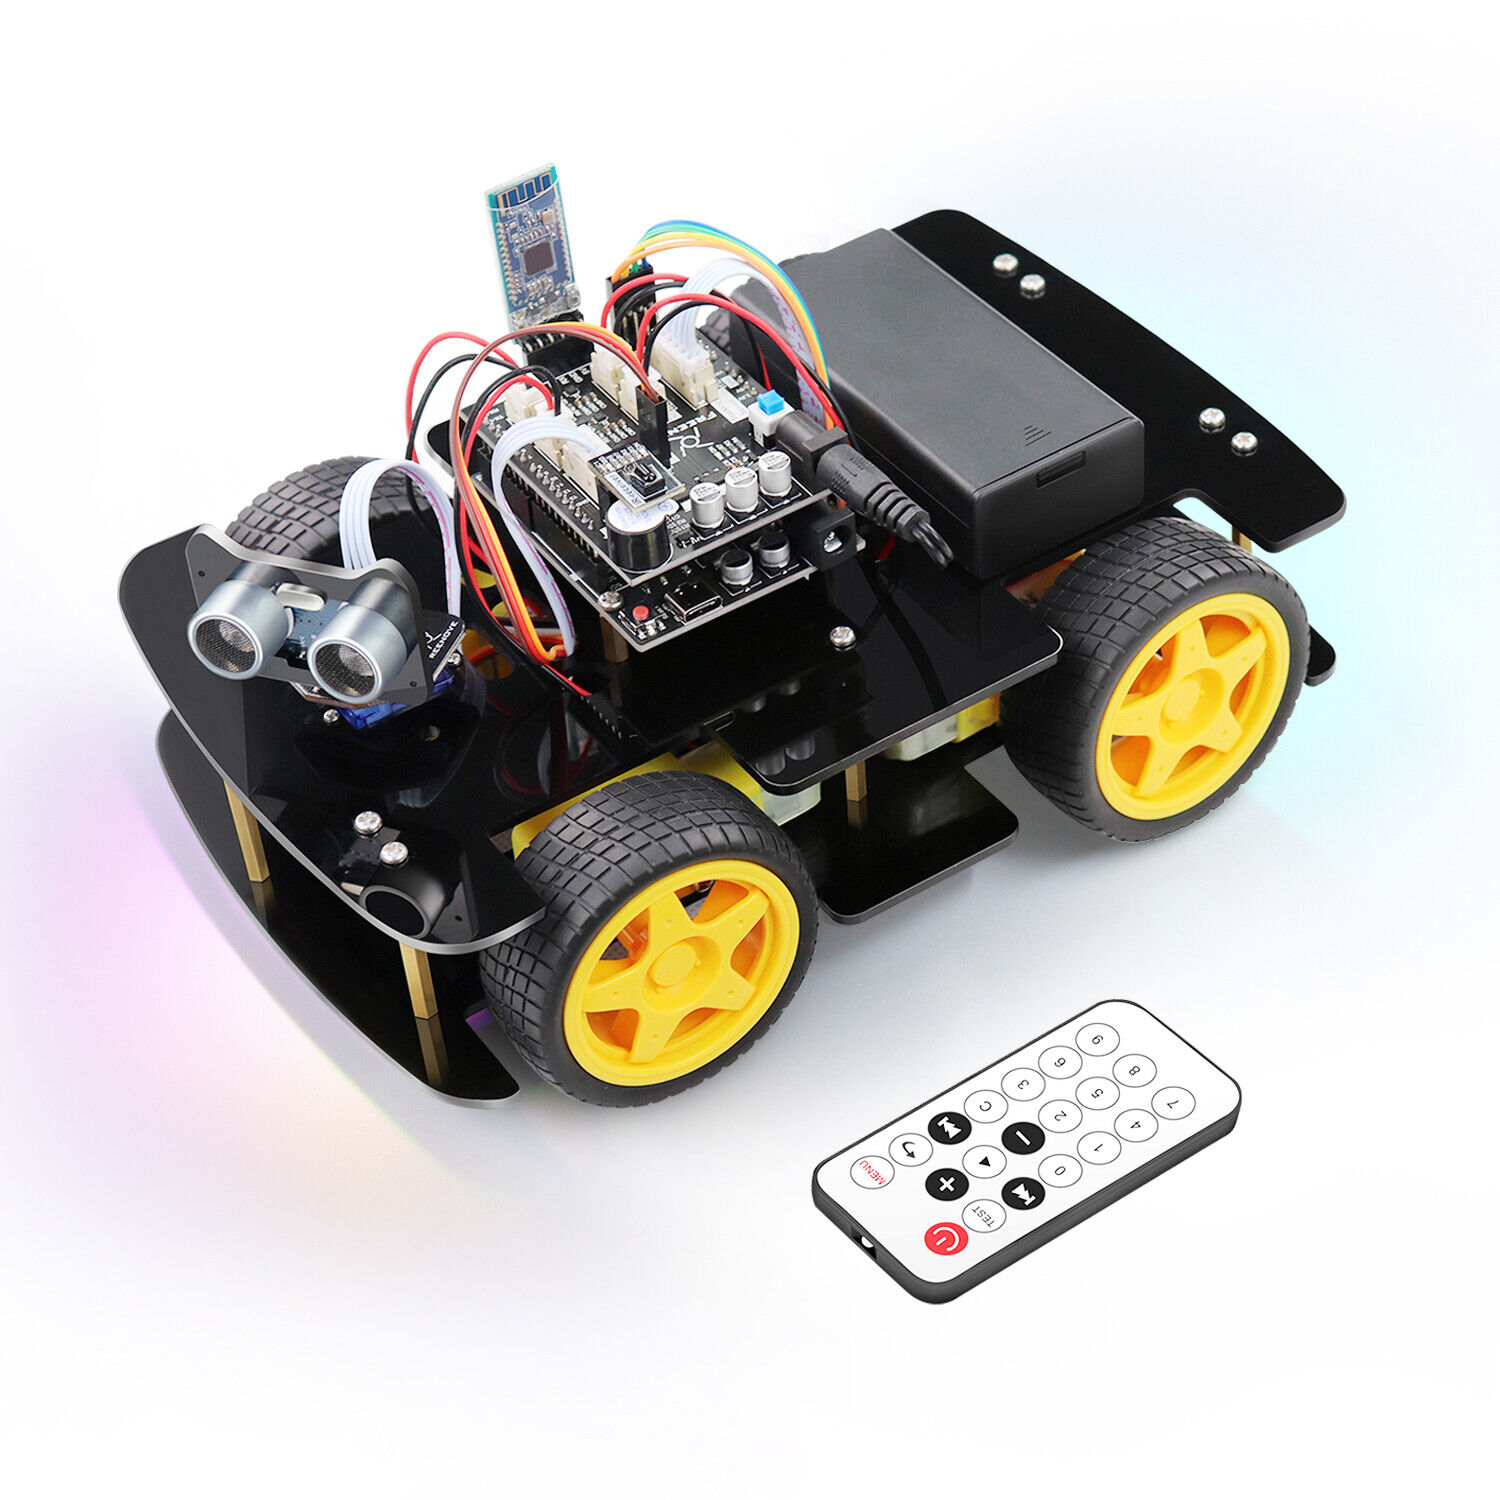 Freenove 4WD Car Kit with Remote (Compatible with Arduino IDE) Ultrasonic Servo